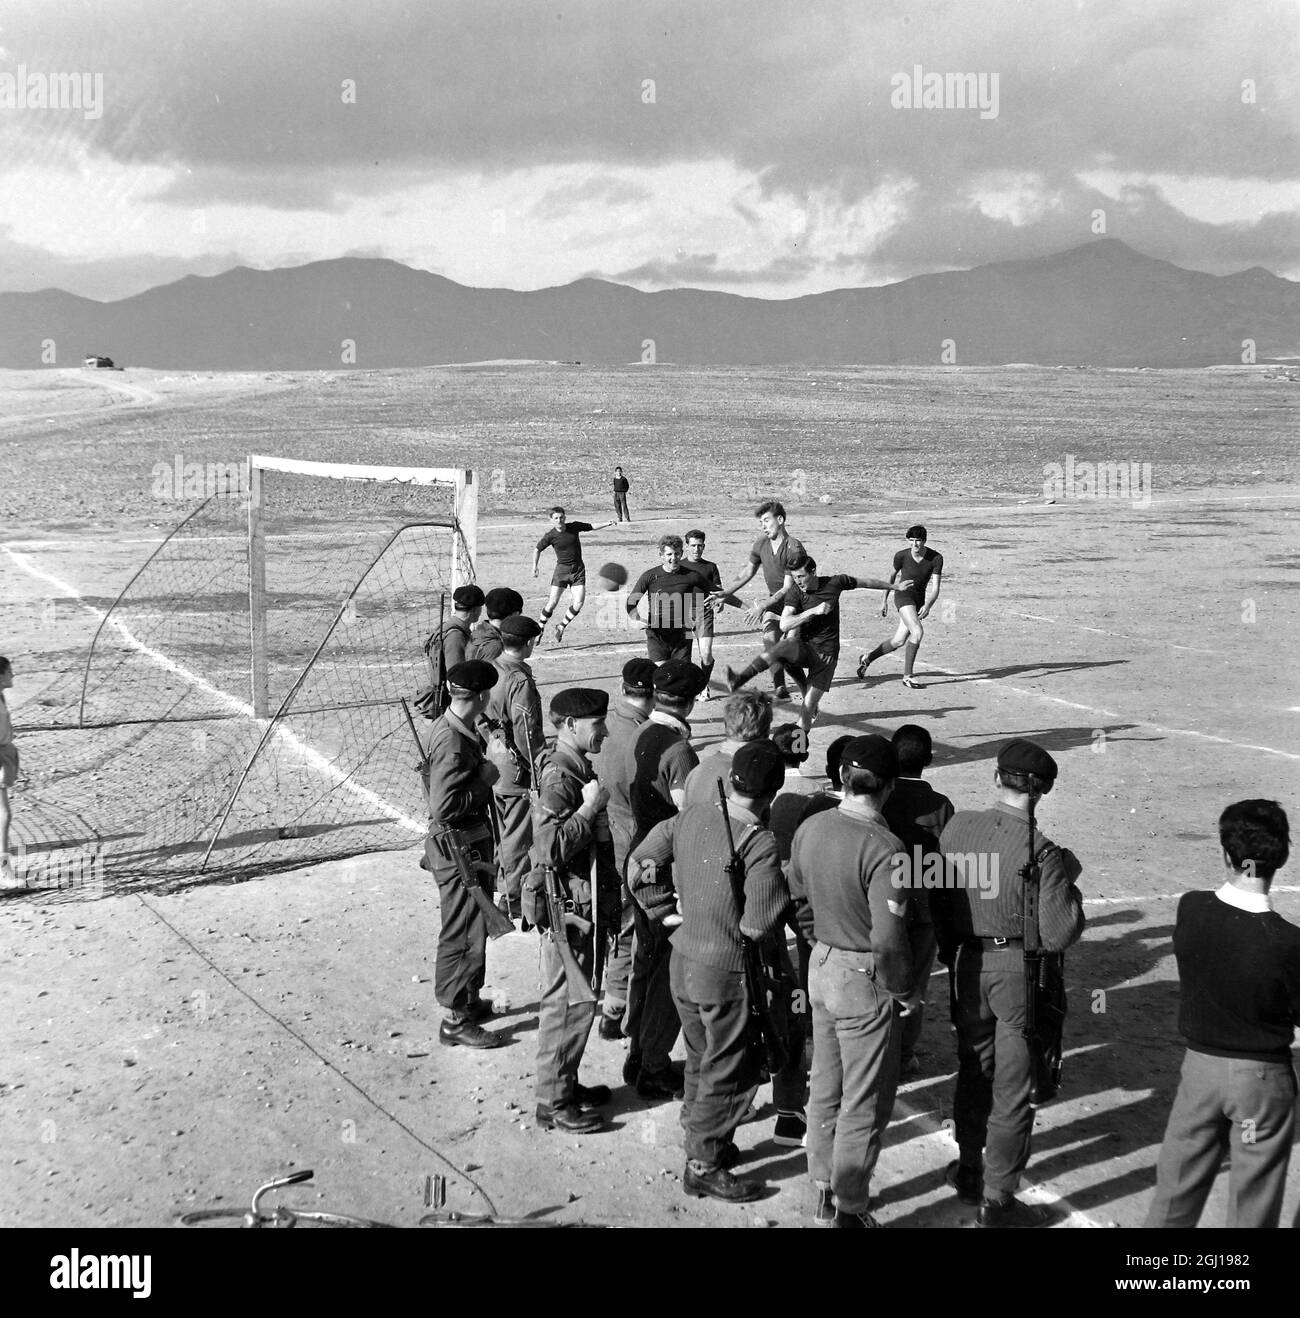 16 FEBRUARY 1964 BRITISH ARMY TROOPS OF THE GLOUCESTERSHIRE REGIMENT, WITH GUNS SLUNG ACROSS THEIR SHOULDERS, WATCH FELLOW COMRADES PLAY FOOTBALL IN NICOSIA, CYPRUS Stock Photo